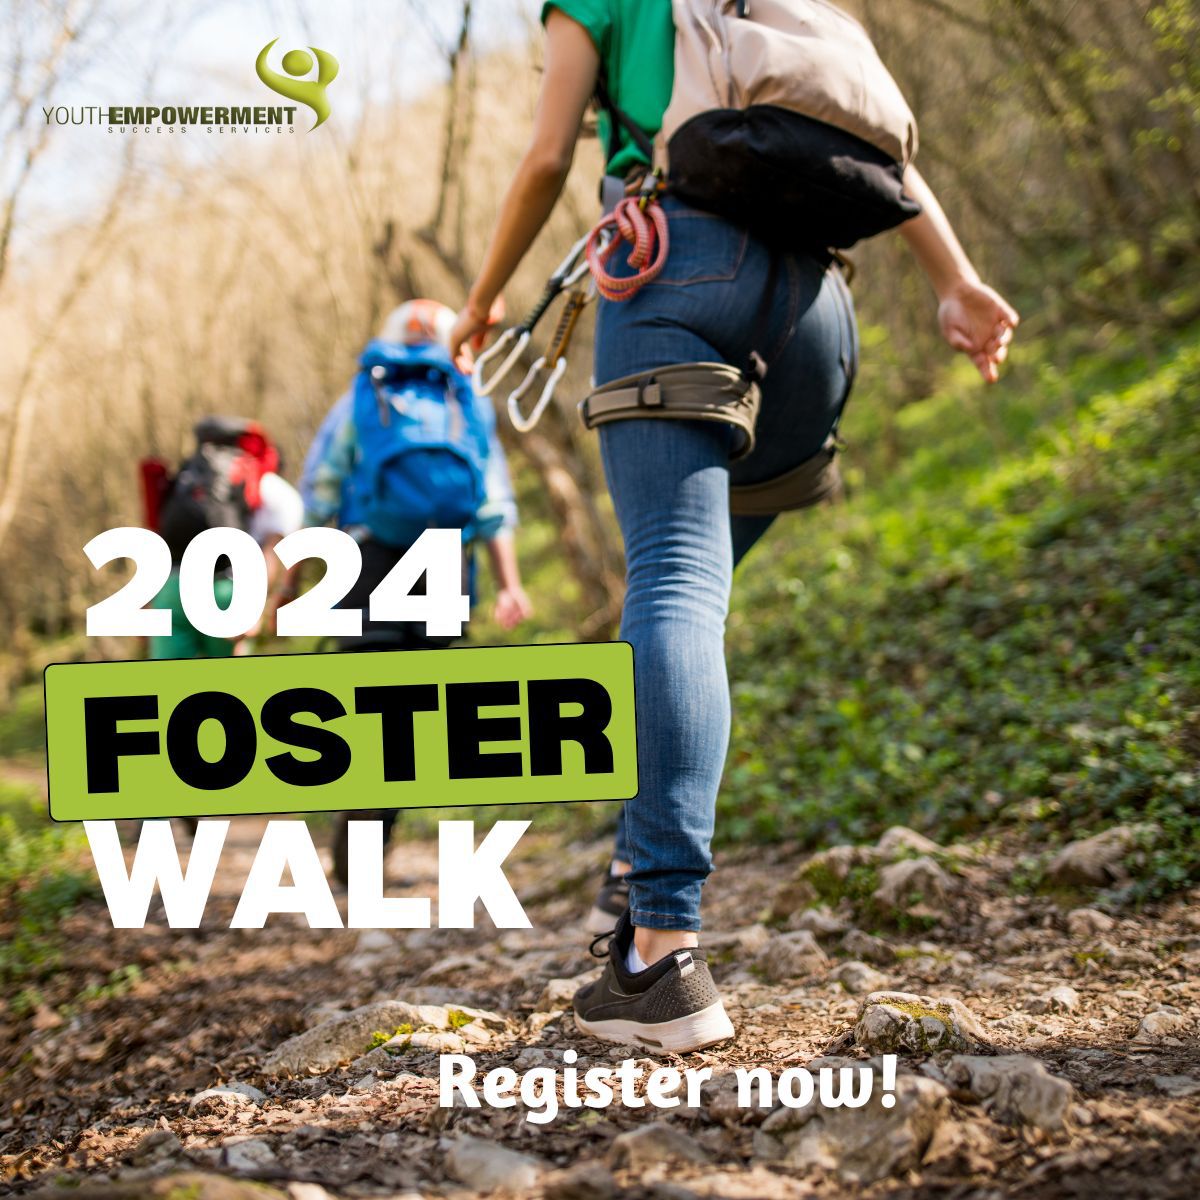 🌟 Join Us for Foster Walk 2024! 🌟

Youth Empowerment Success Services (YESS4Youth) is hosting this event to raise awareness and support for youth aging out of foster care. 

#FosterWalk2024 #SupportYouth #FosterCareAwareness #YouthEmpowerment #CommunitySupport